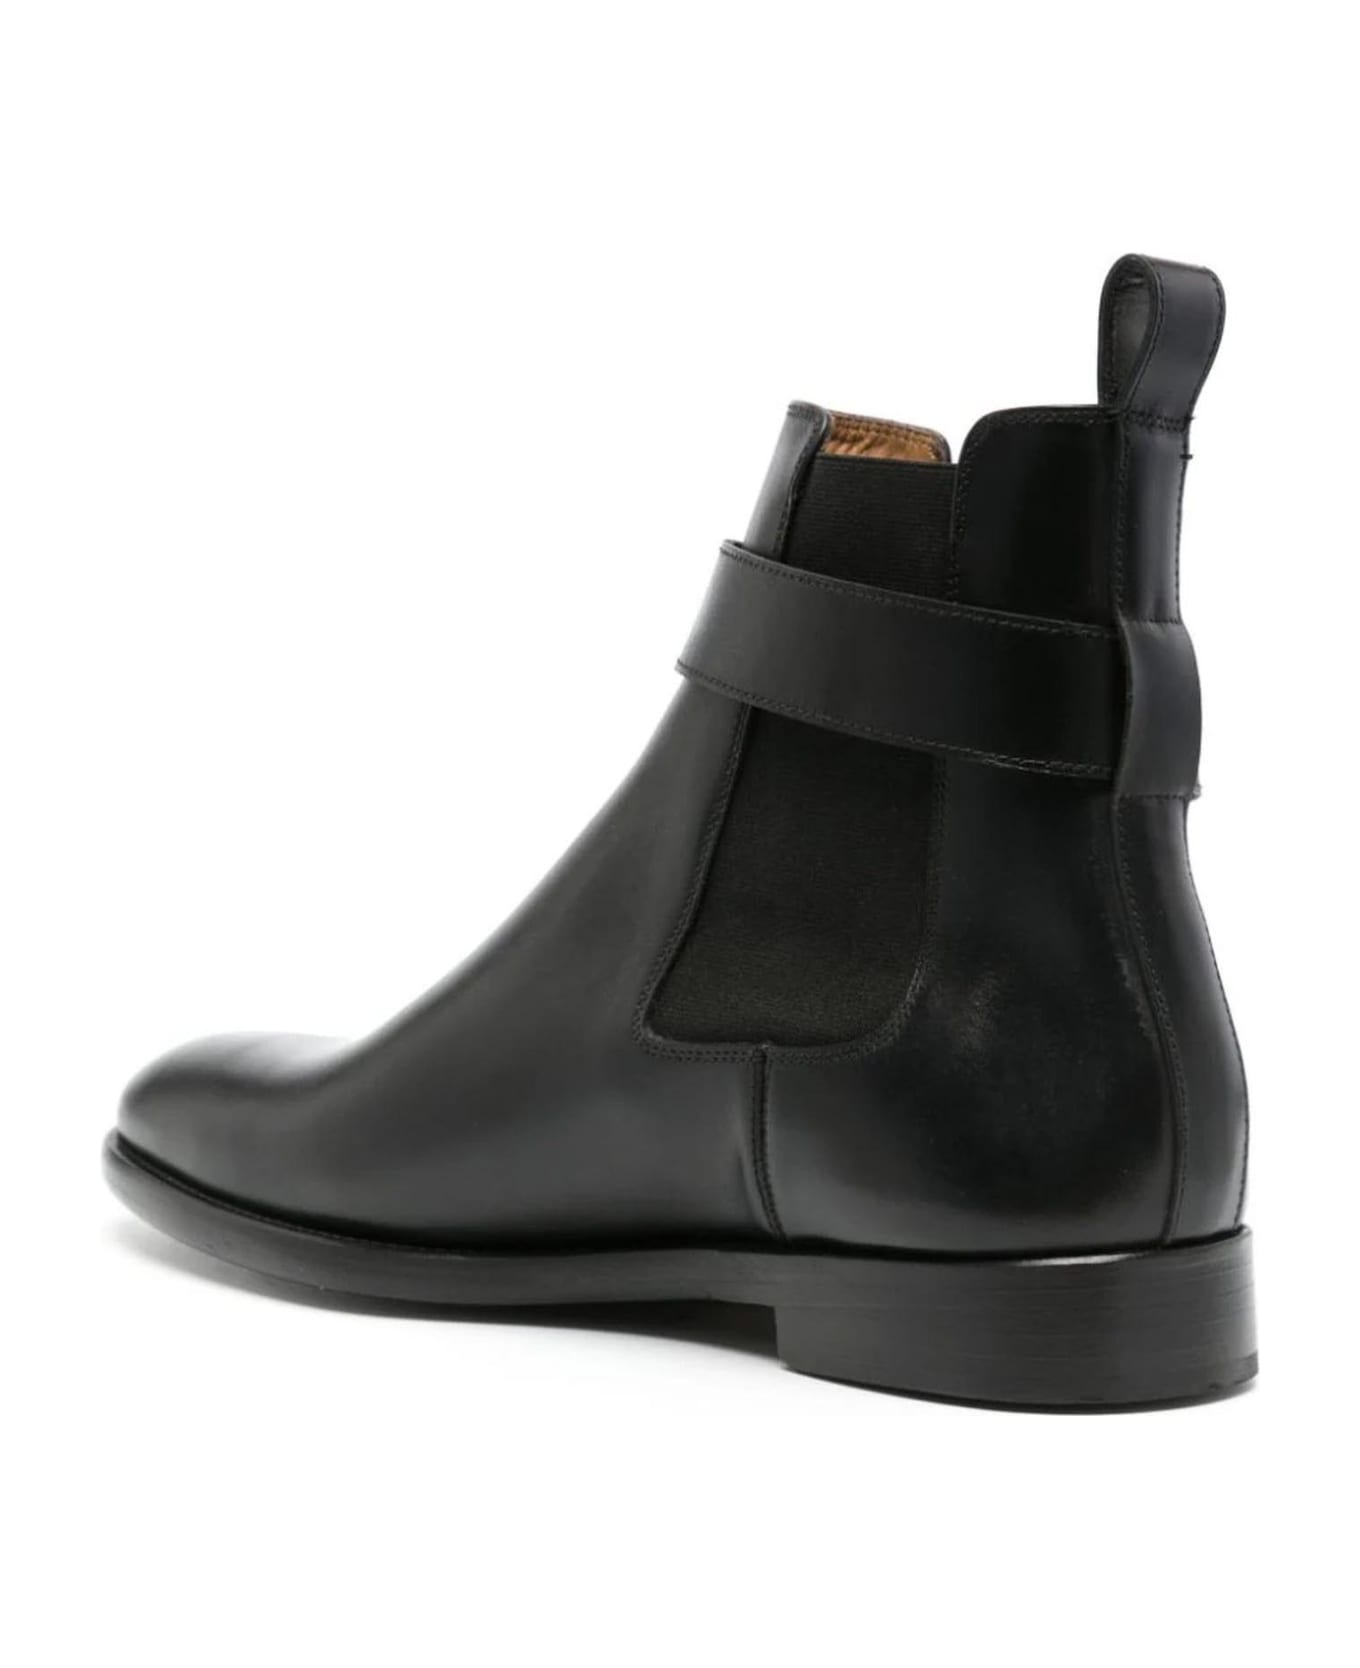 Edhen Milano Black Calf Leather Ankle Boots - Nero